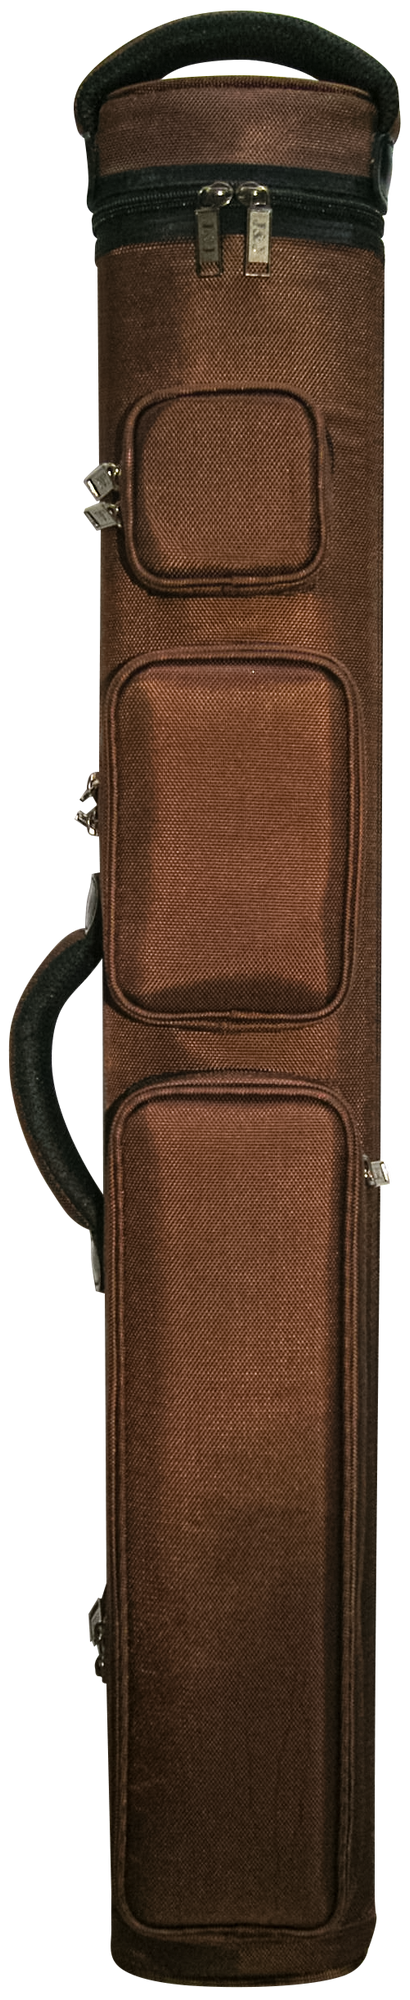 J&J 3x4 Rugged Brown DOUBLE STRAP Cue Case Pool Cue Case